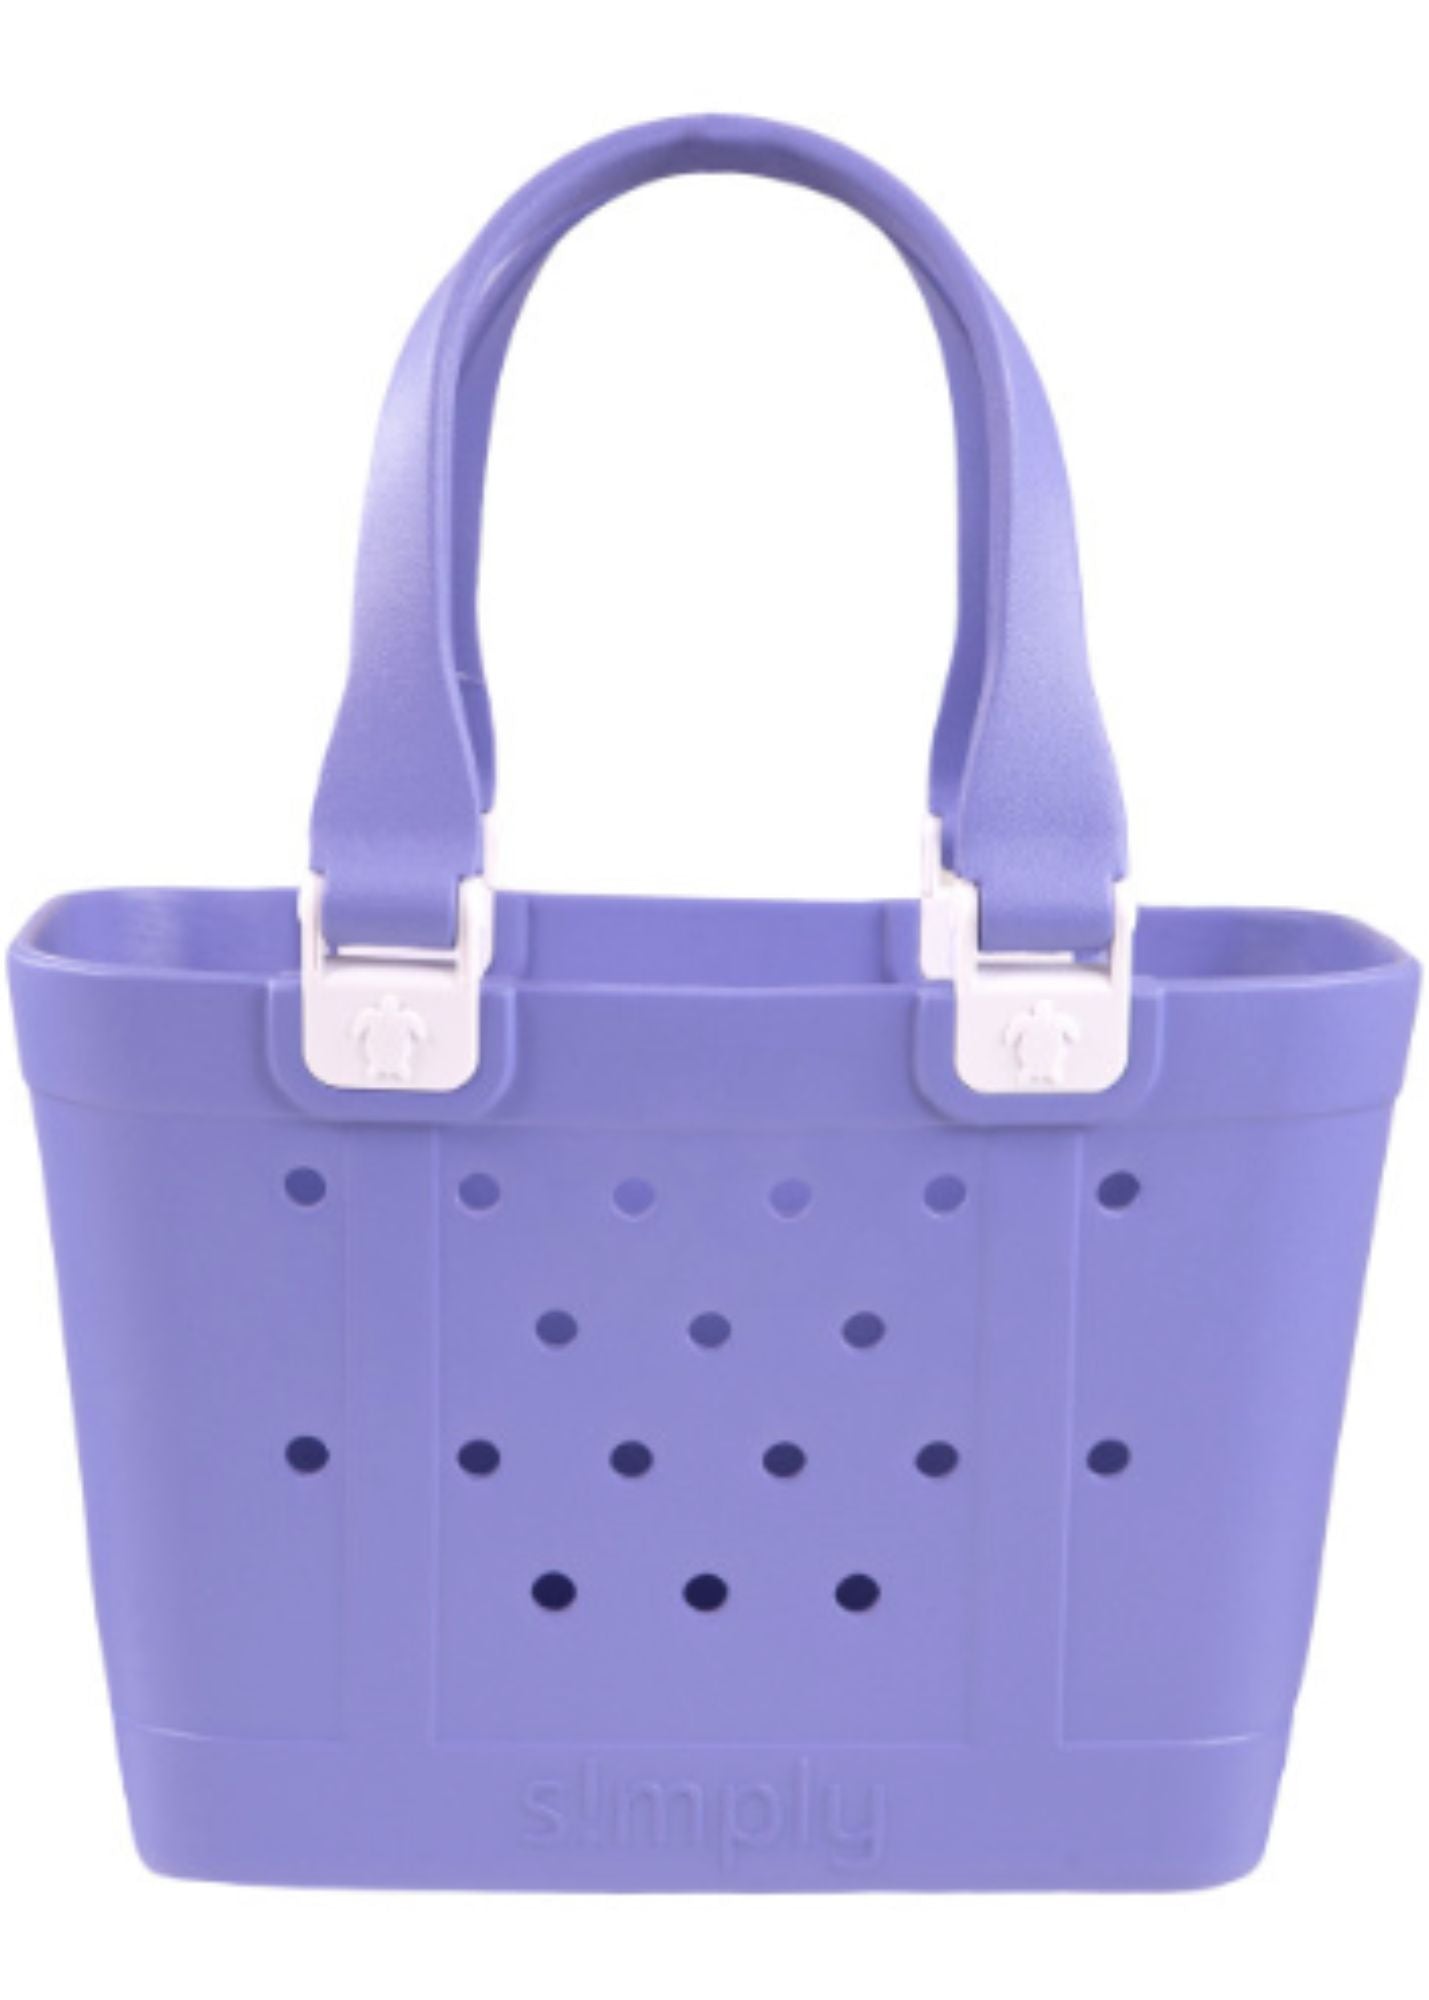 Simply Mini Tote Bag Accessories Orchid